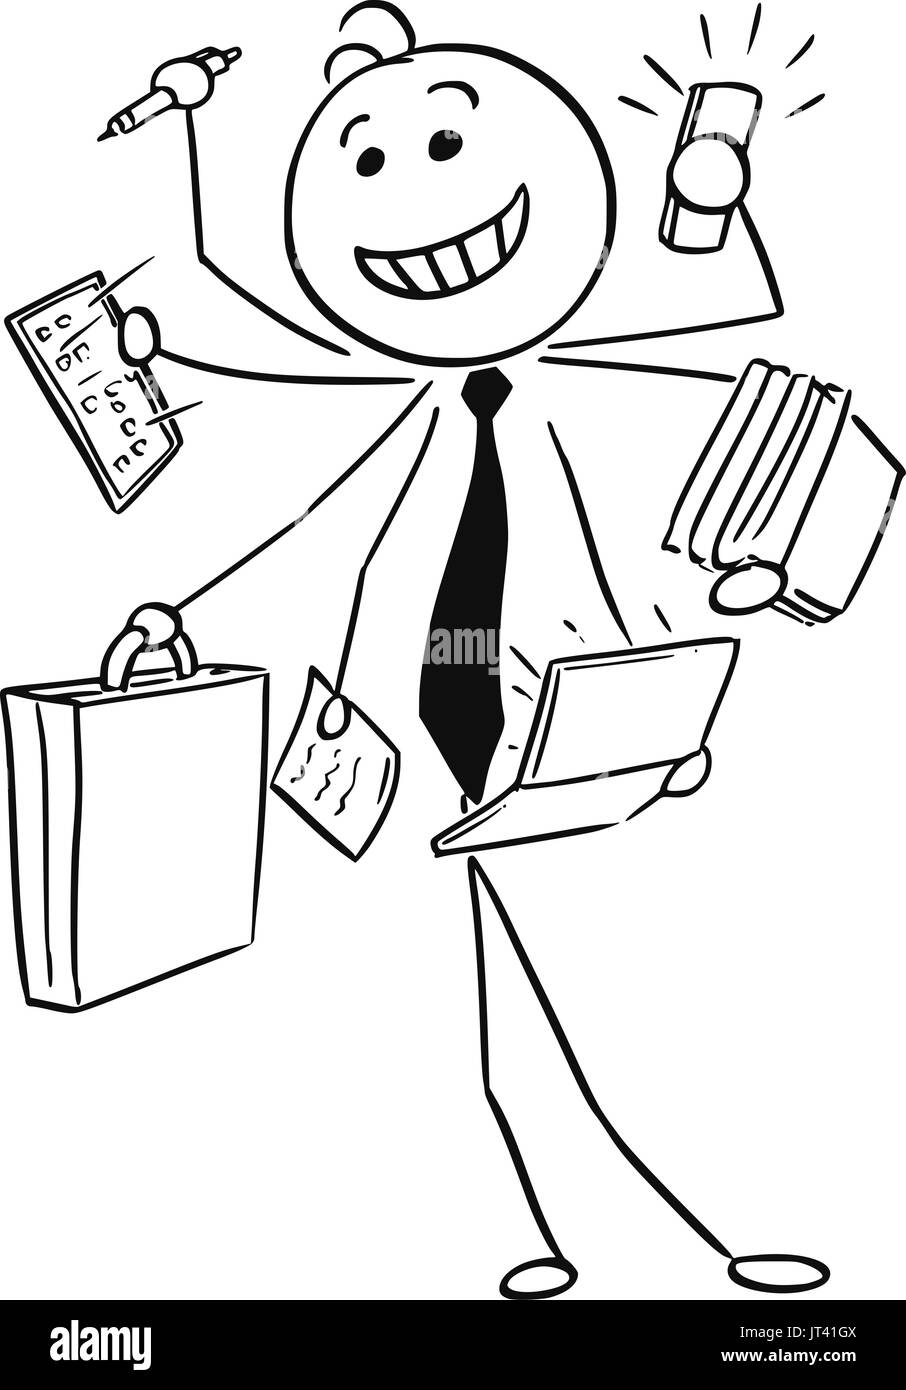 Cartoon vector stick man illustration of successful happy smiling businessman or seller working on many tasks in same time, conceptual idea of man wit Stock Vector